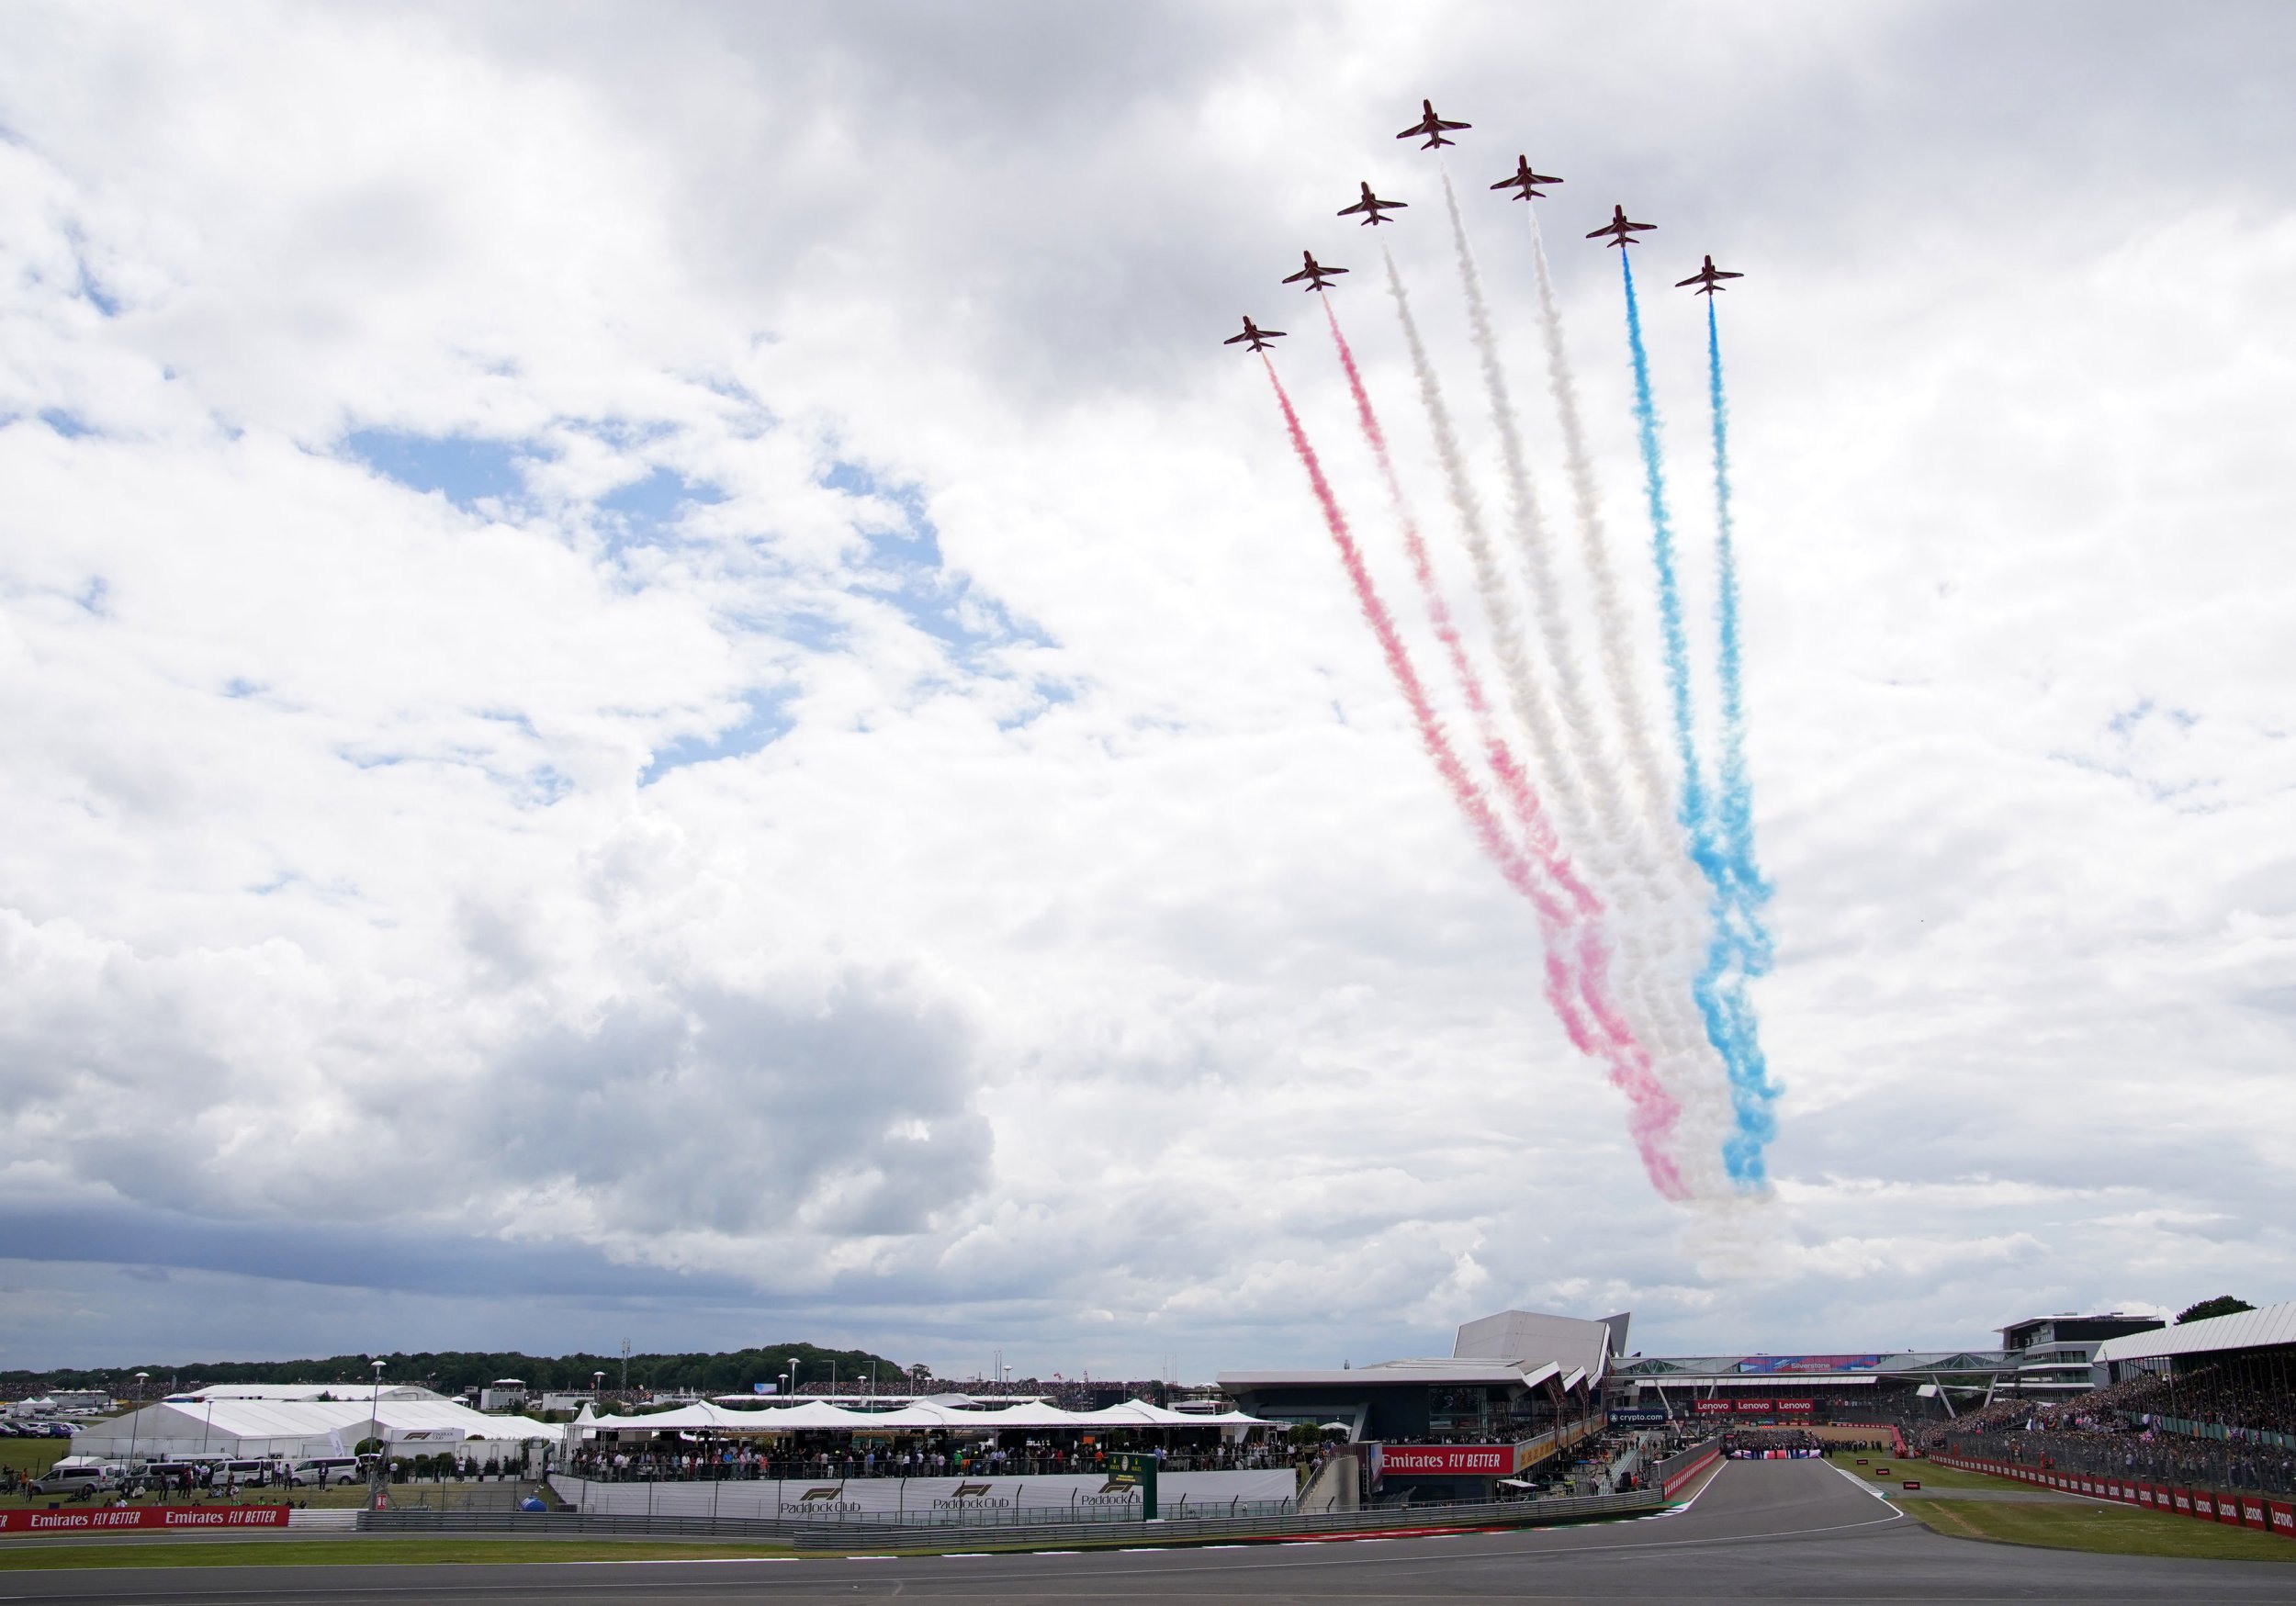 The Farnborough Air Show 2022:  Prospects For India?